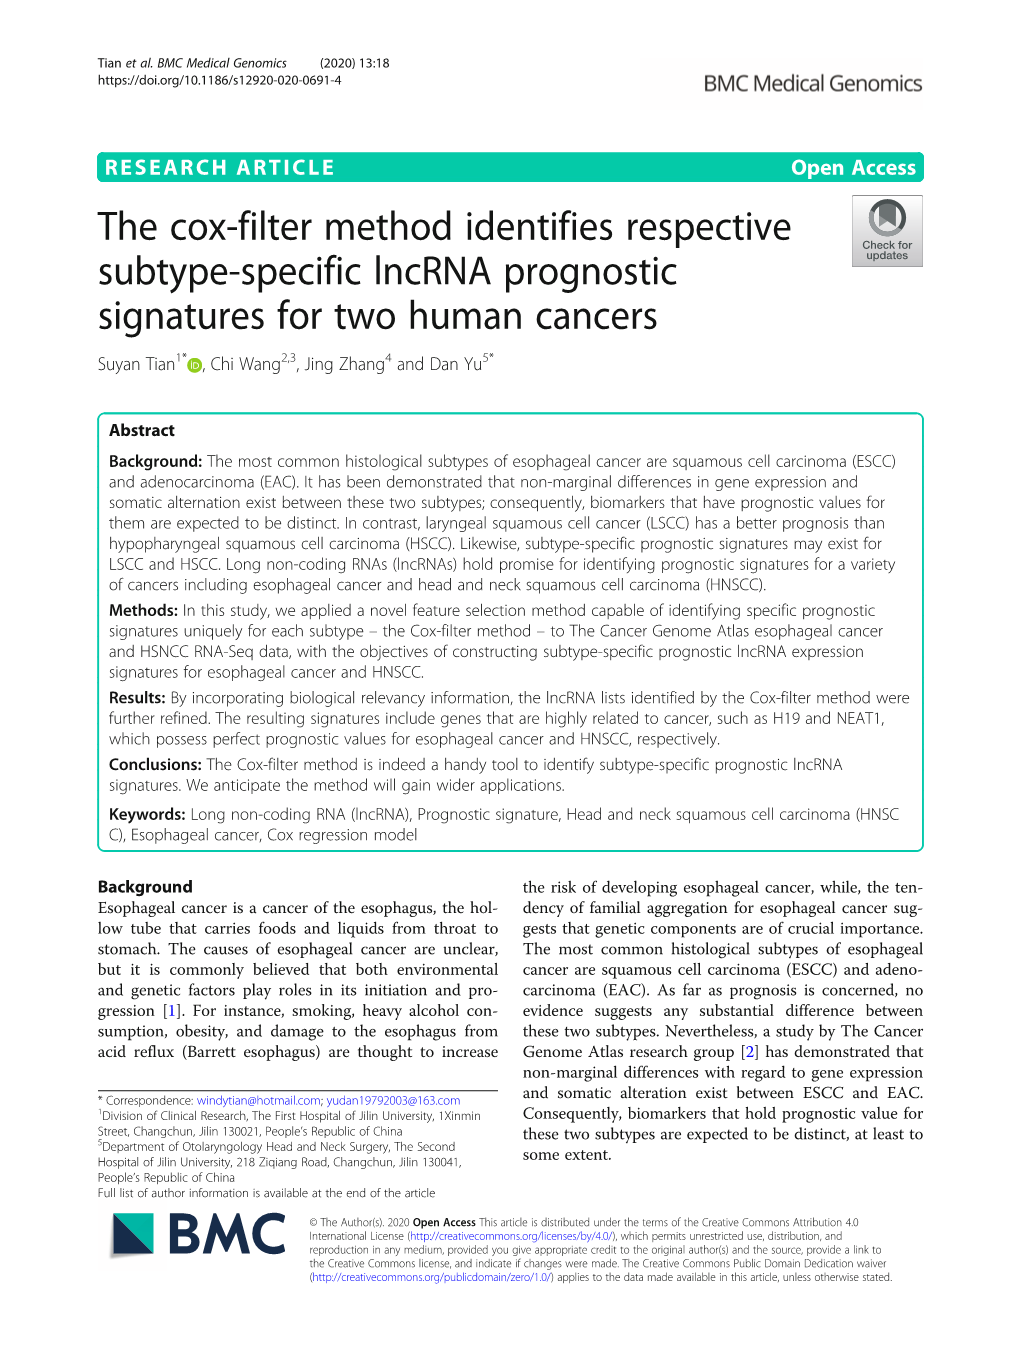 The Cox-Filter Method Identifies Respective Subtype-Specific Lncrna Prognostic Signatures for Two Human Cancers Suyan Tian1* , Chi Wang2,3, Jing Zhang4 and Dan Yu5*